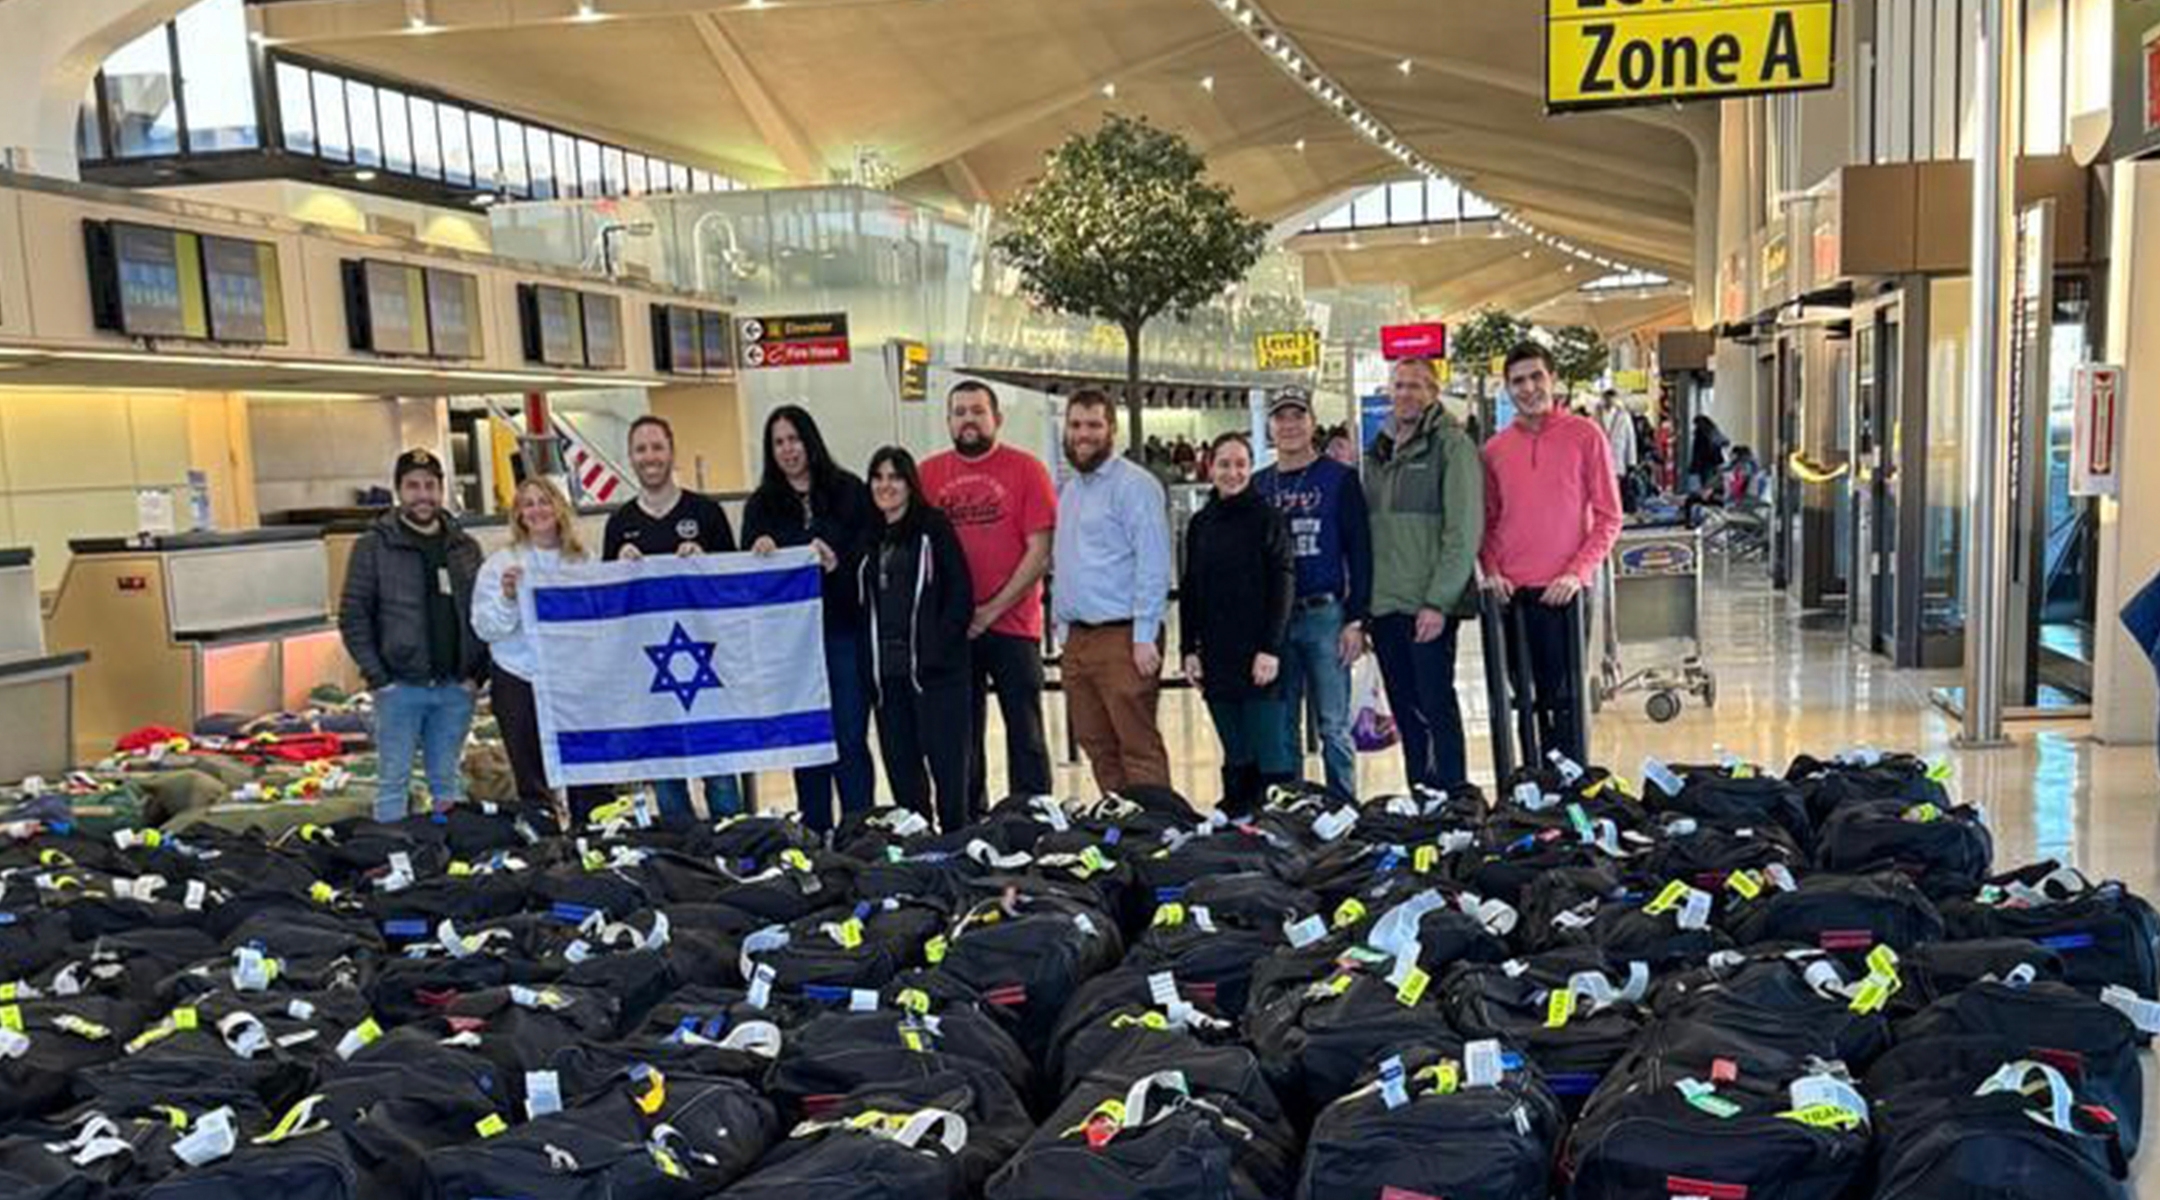 A shipment of tactical boots for Israeli soldiers purchased by Boots For Israel using donated funds arrives at Israel’s Ben Gurion International Airport. (Courtesy)